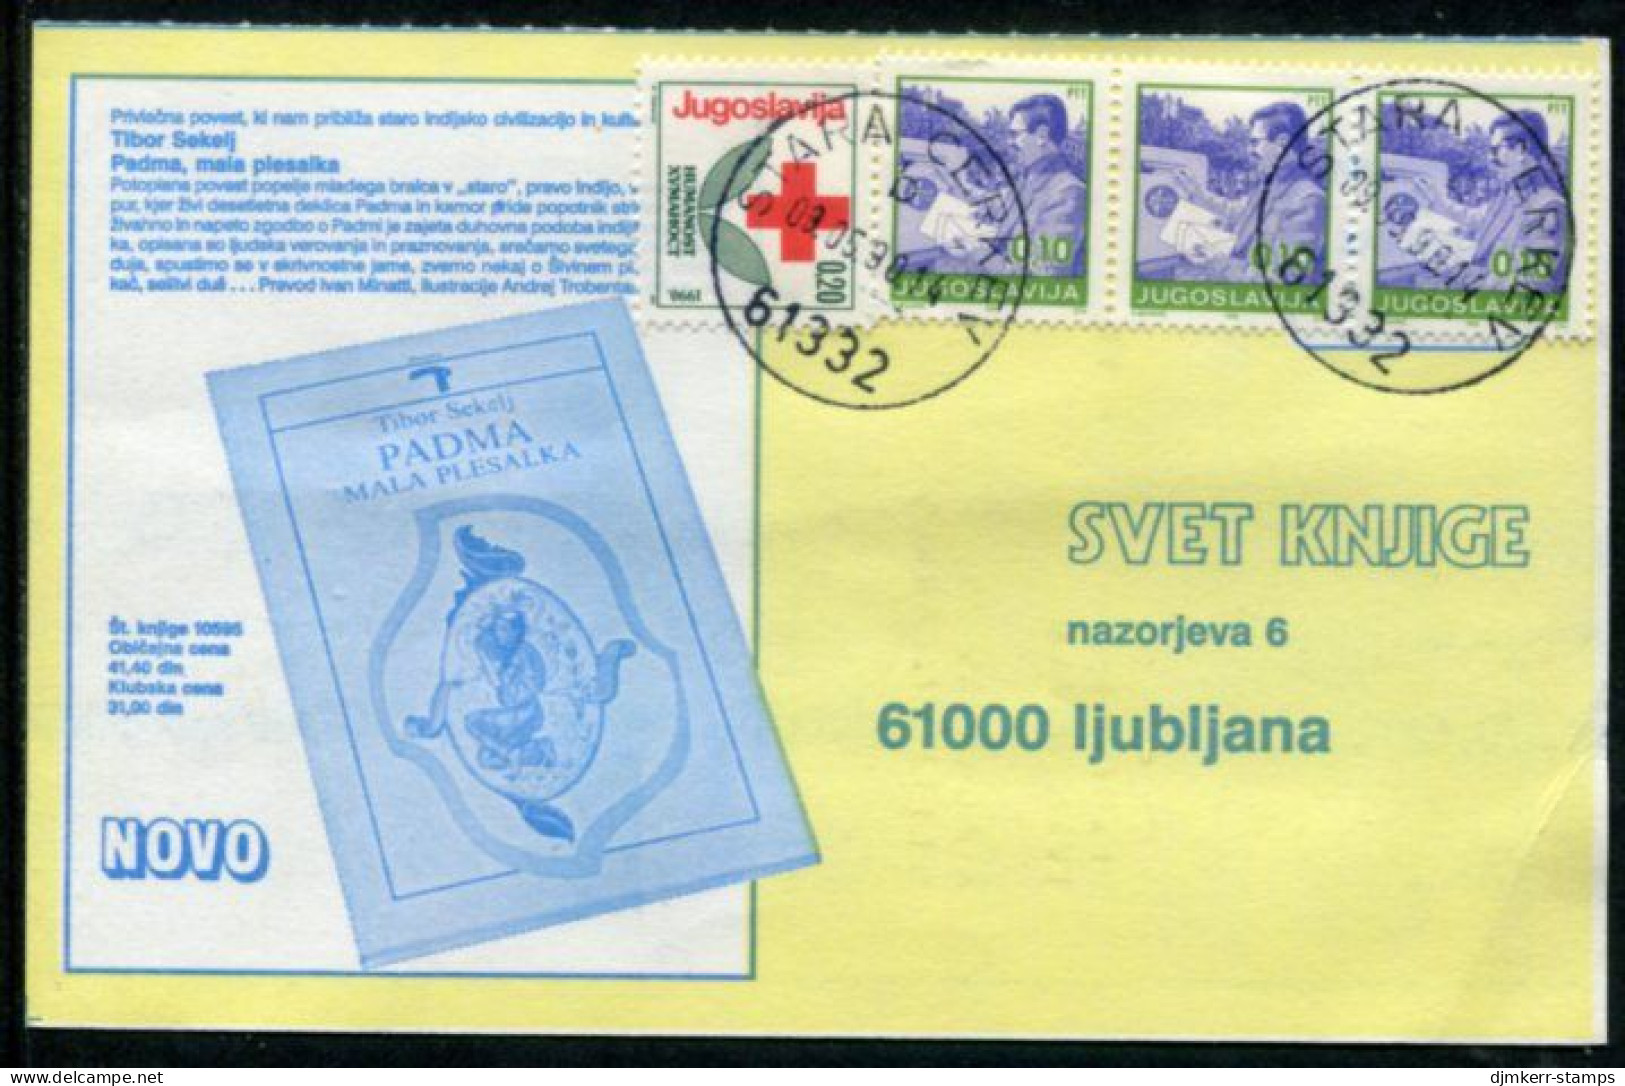 YUGOSLAVIA 1990 Commercial Postcard With  Red Cross Week 0.20d Tax Perforated 12½.  Michel ZZM 178A - Wohlfahrtsmarken